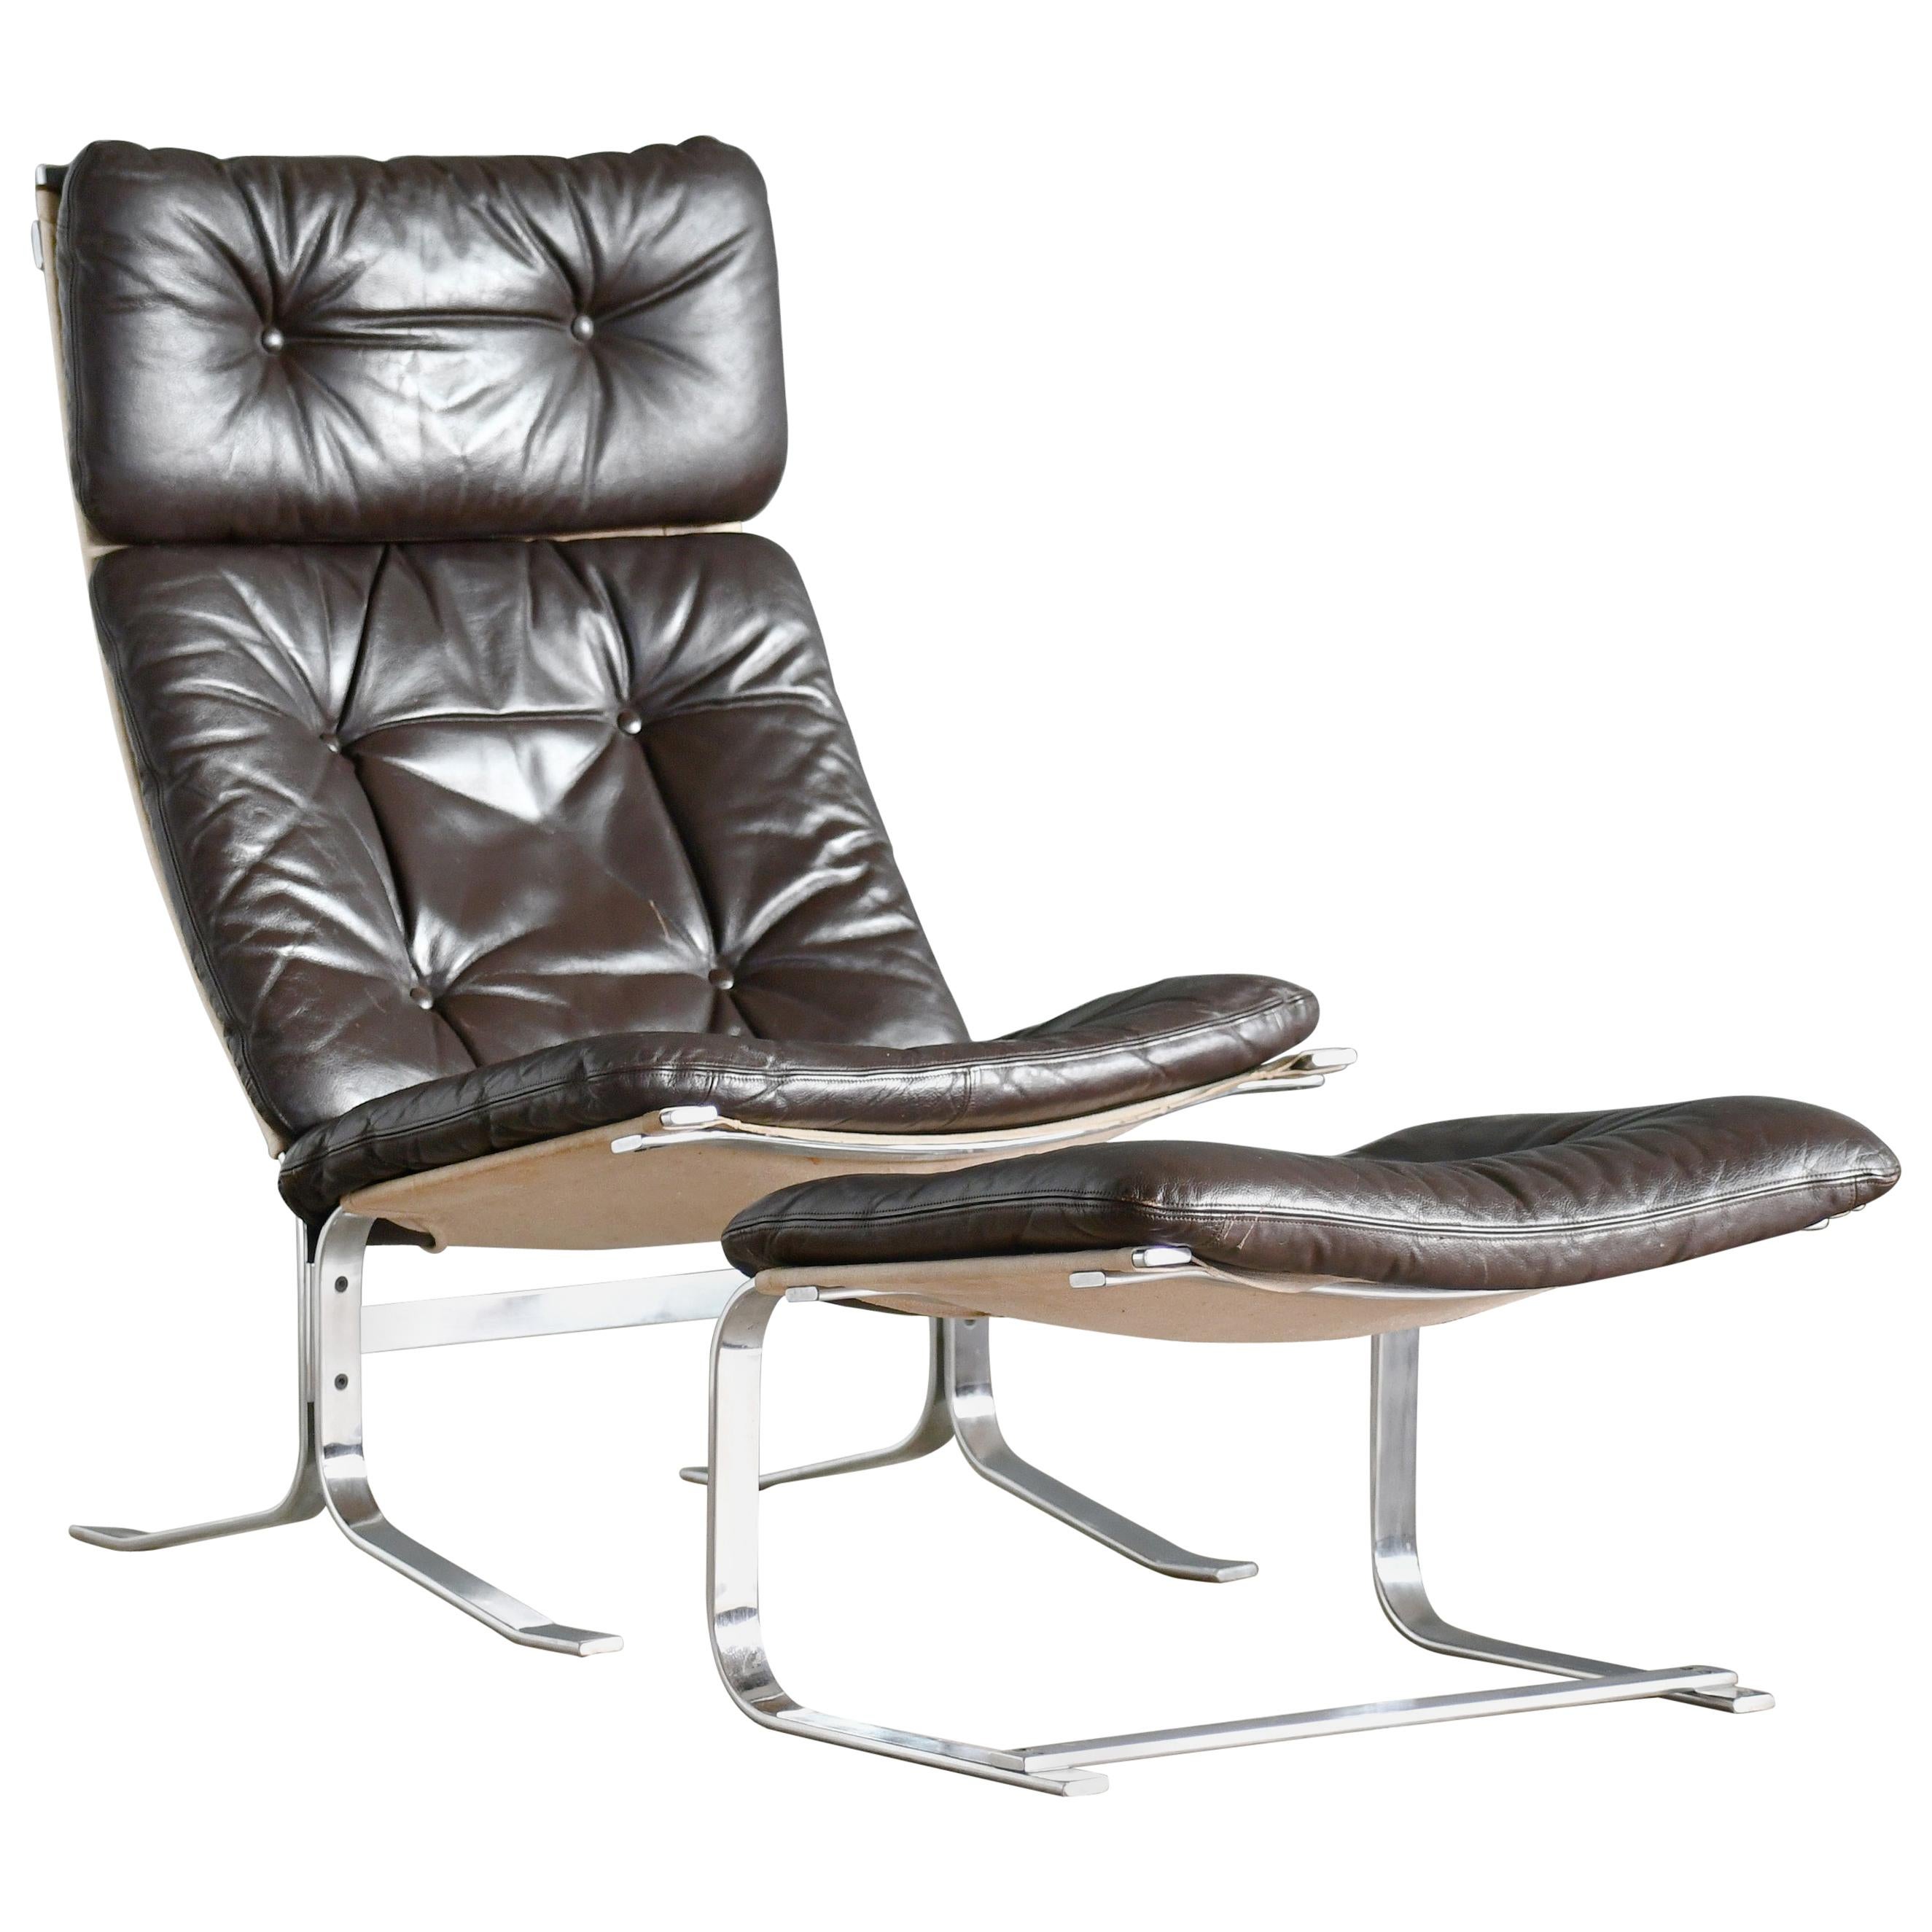 Danish Mid-Century Poul Kjaerholm Style Easy Chair in Leather and Steel ca, 1970 For Sale